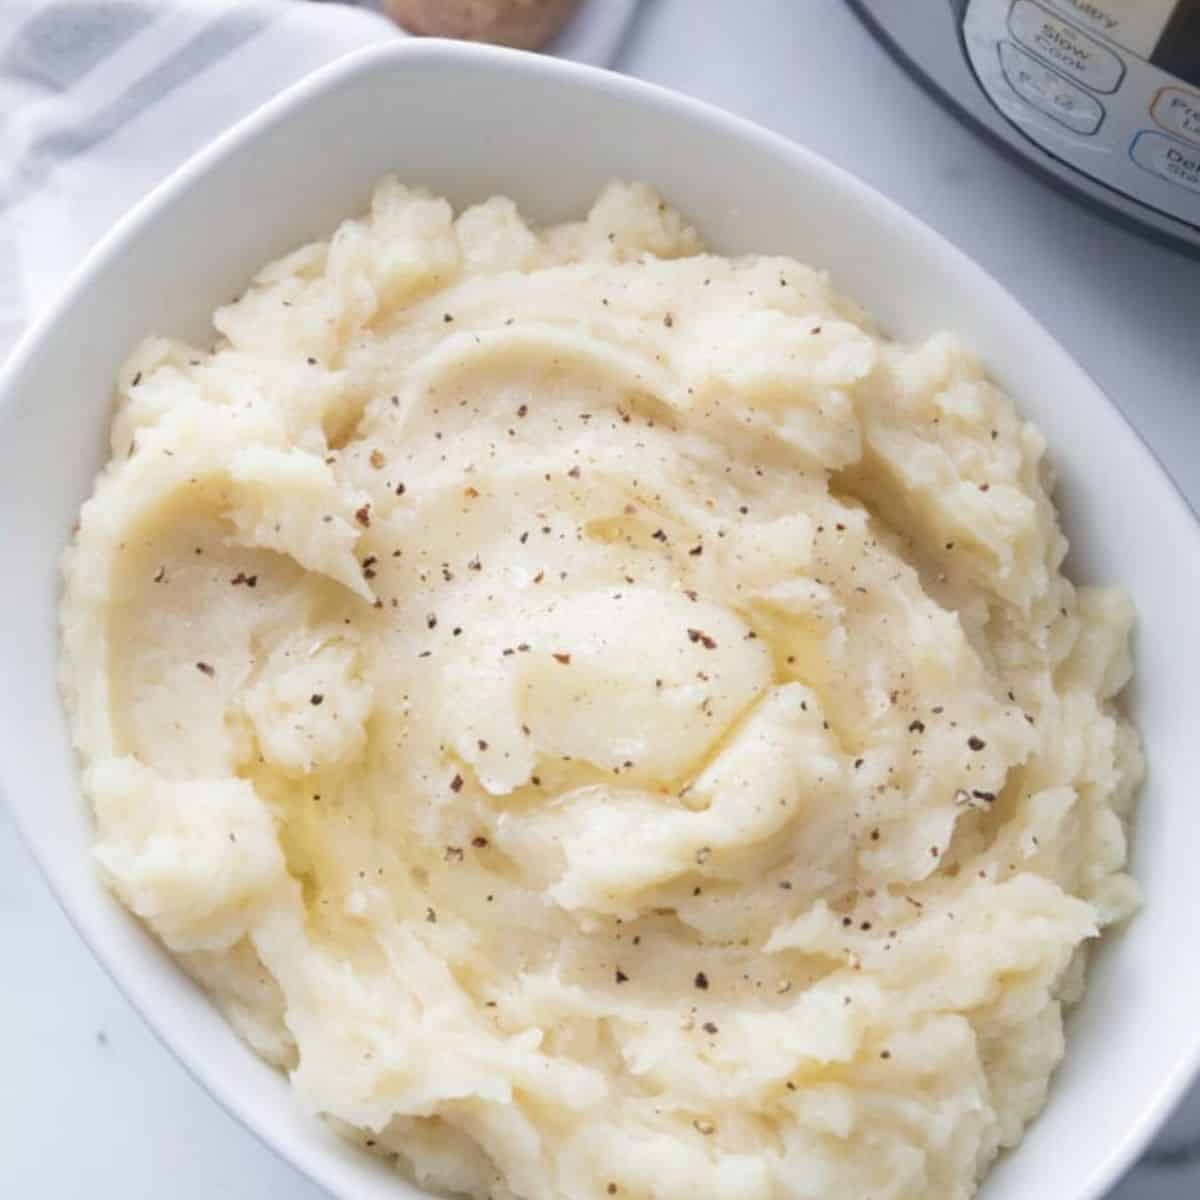 White serving bowl full of mashed potatoes topped with fresh black pepper and melted vegan butter making them dairy free.